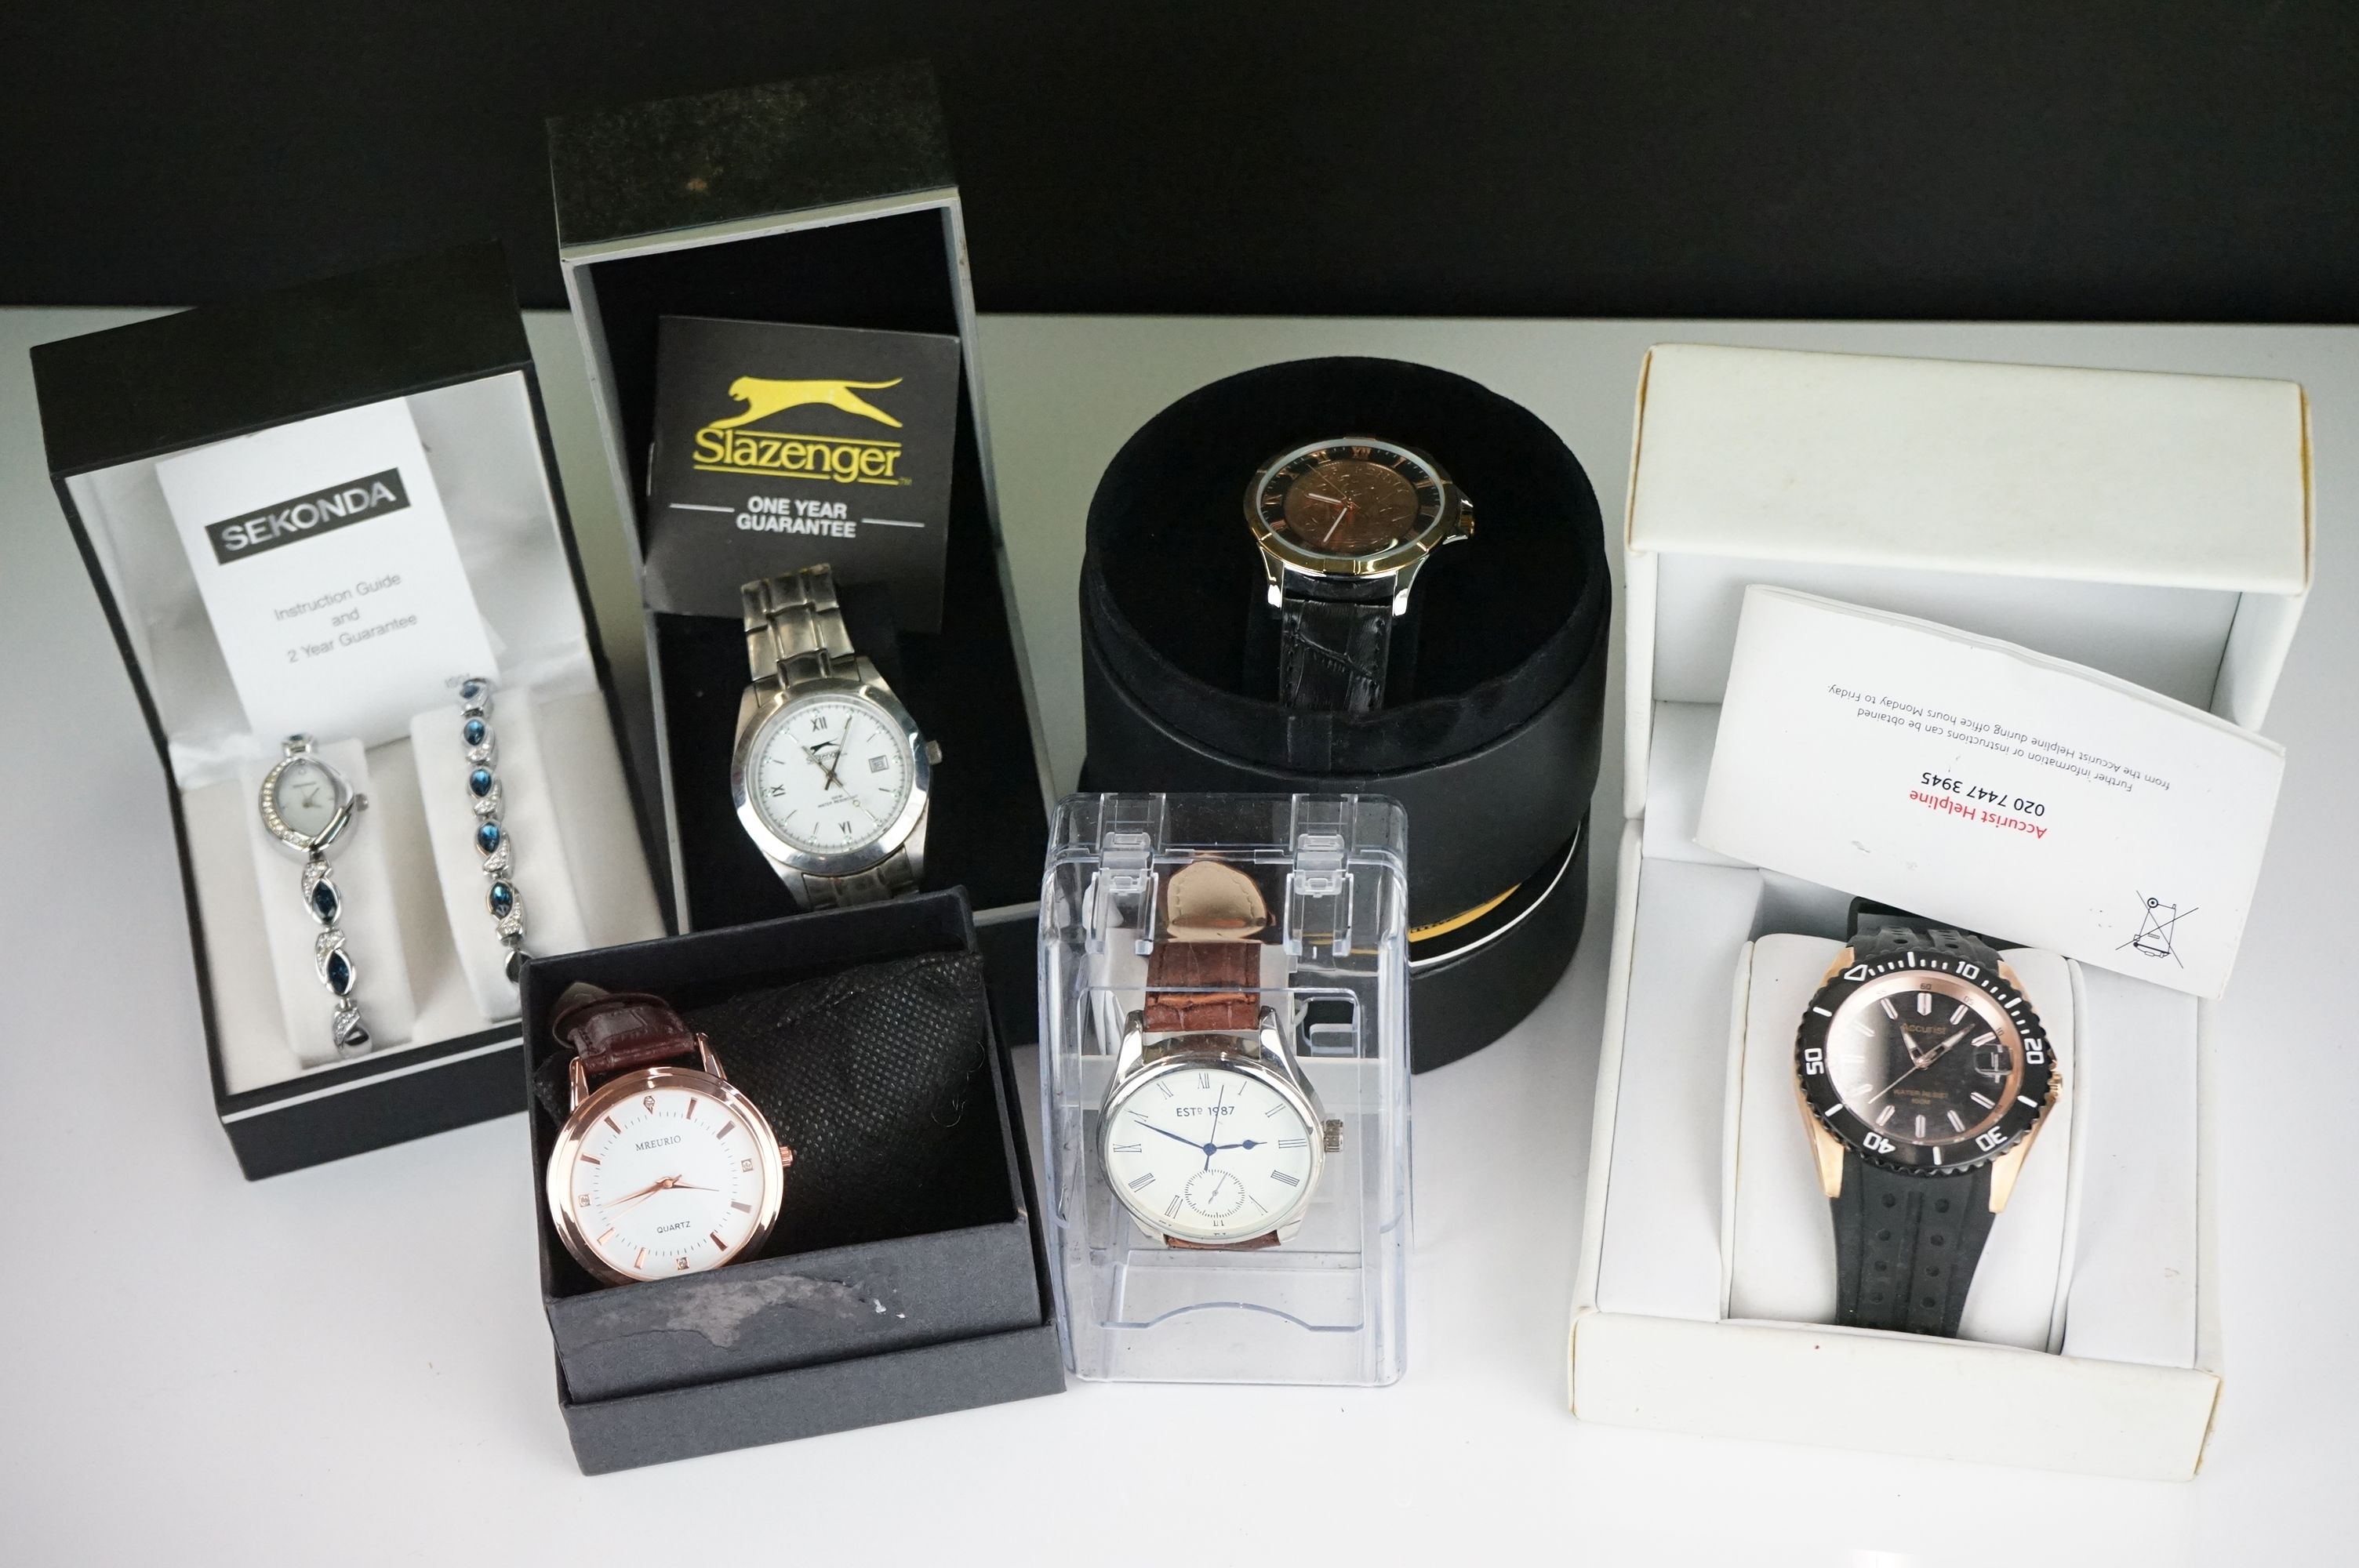 Collection of watches to include 1966 Half Penny, Accurist, Slazenger etc